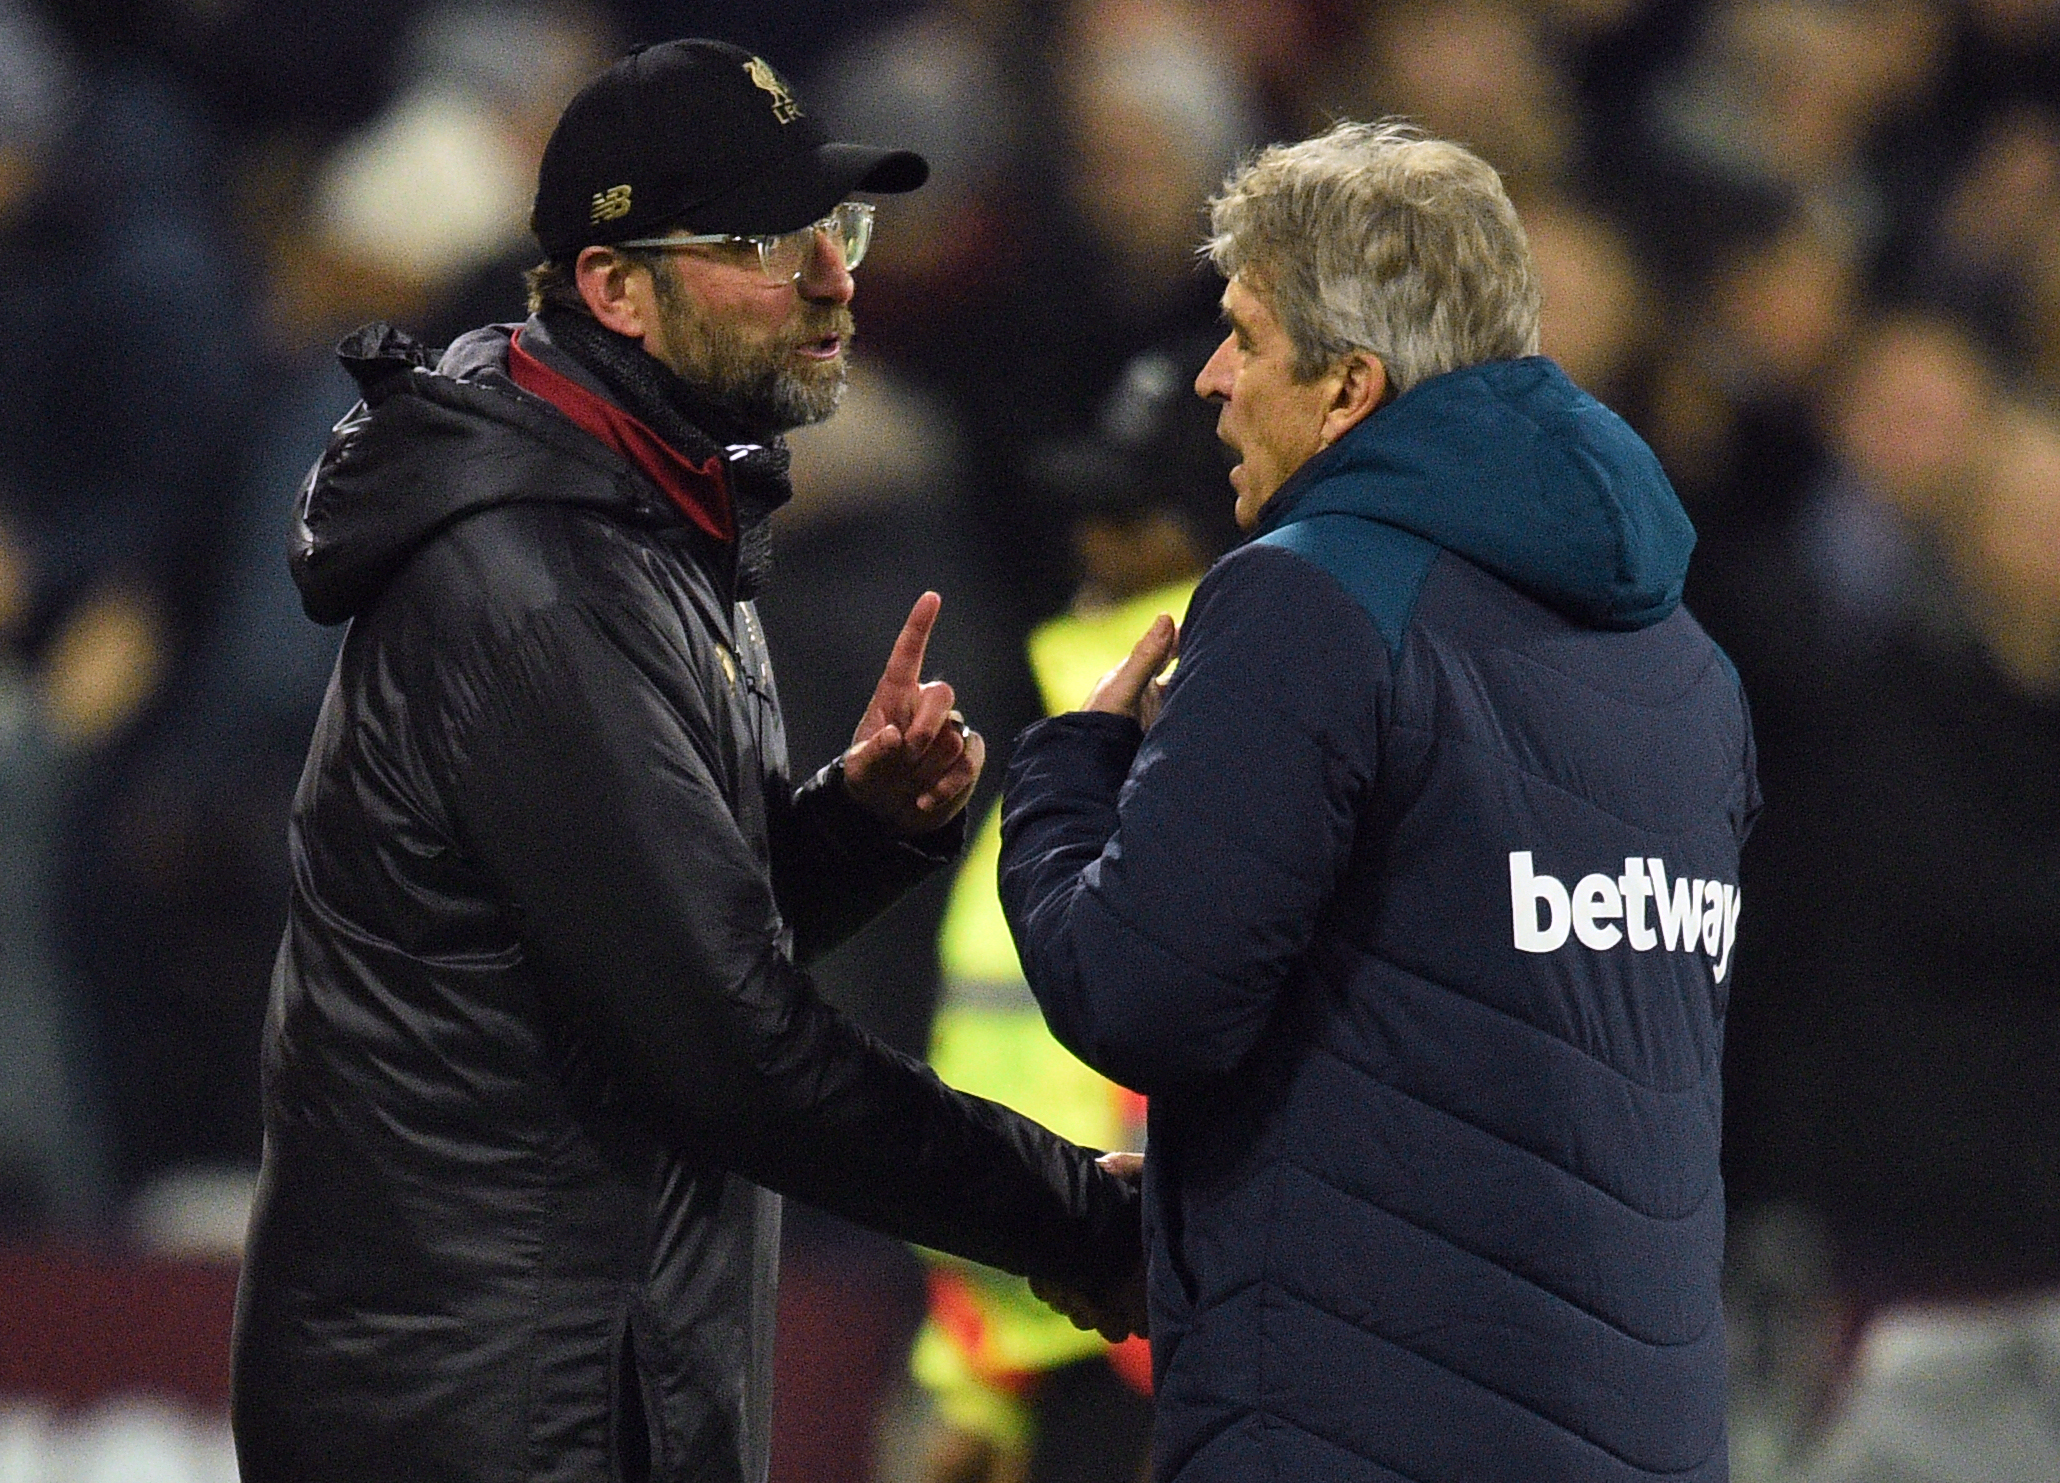 Liverpool's German manager Jurgen Klopp (L) speaks to West Ham United's Chilean manager Manuel Pellegrini after the English Premier League football match between West Ham United and Liverpool at The London Stadium, in east London on February 4, 2019. - The game finished 1-1. (Photo by Glyn KIRK / AFP) / RESTRICTED TO EDITORIAL USE. No use with unauthorized audio, video, data, fixture lists, club/league logos or 'live' services. Online in-match use limited to 120 images. An additional 40 images may be used in extra time. No video emulation. Social media in-match use limited to 120 images. An additional 40 images may be used in extra time. No use in betting publications, games or single club/league/player publications. /         (Photo credit should read GLYN KIRK/AFP/Getty Images)